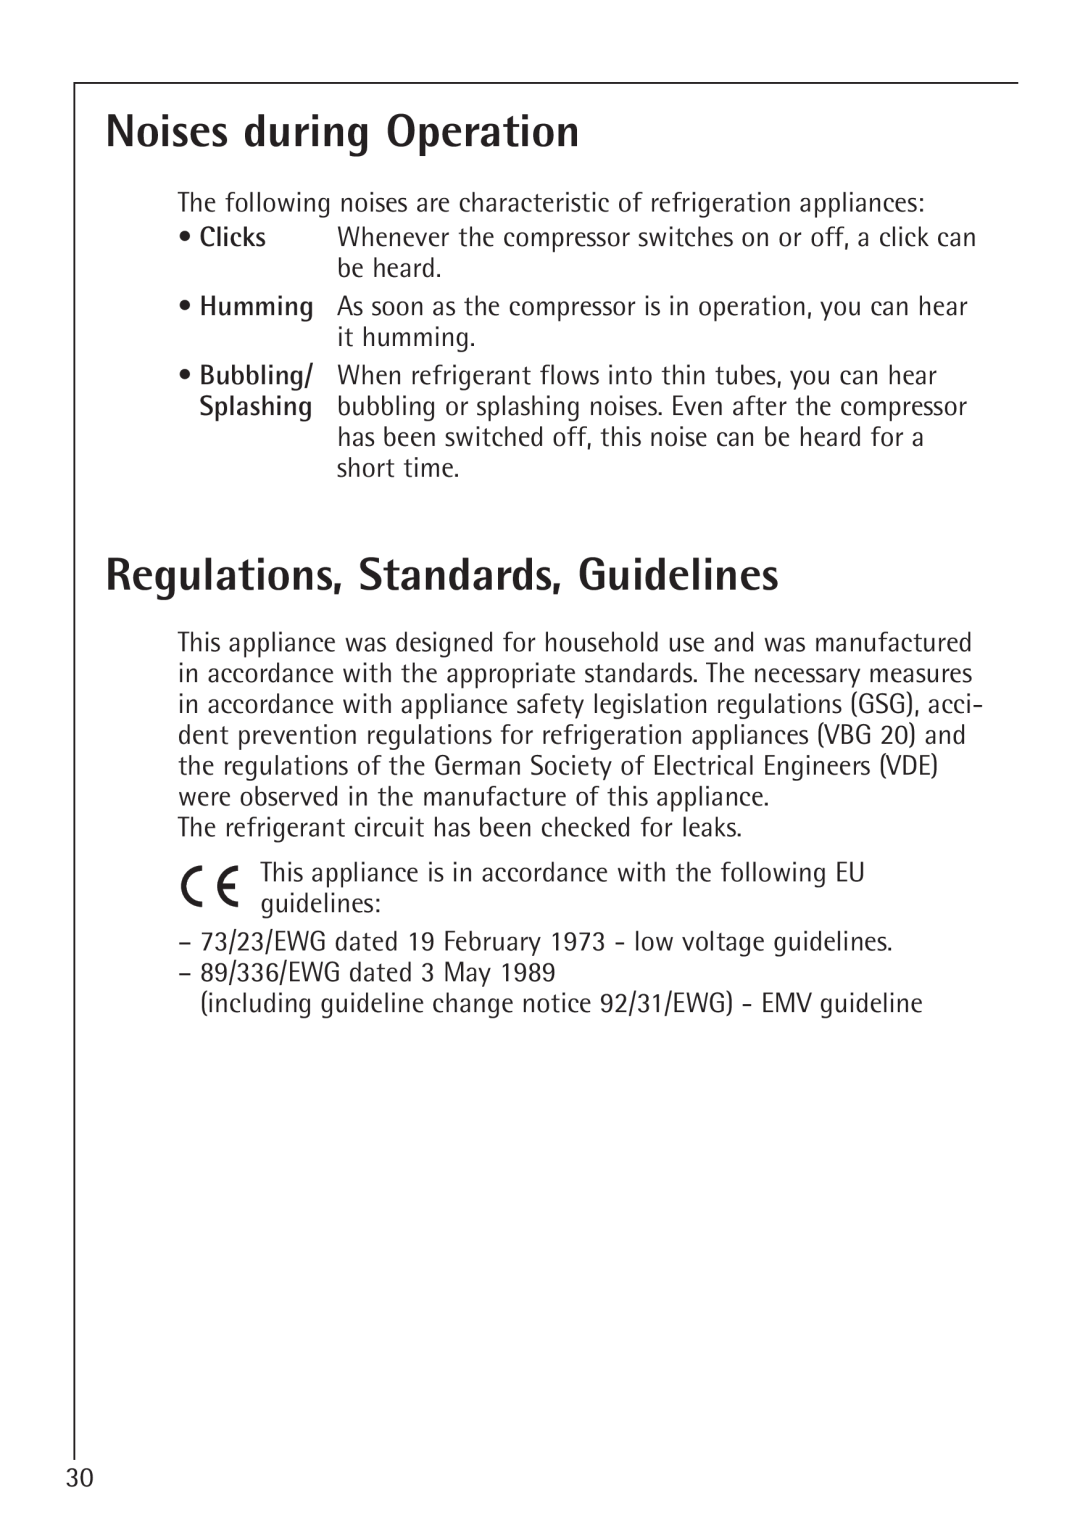 Electrolux 66050i installation instructions Noises during Operation, Regulations, Standards, Guidelines 